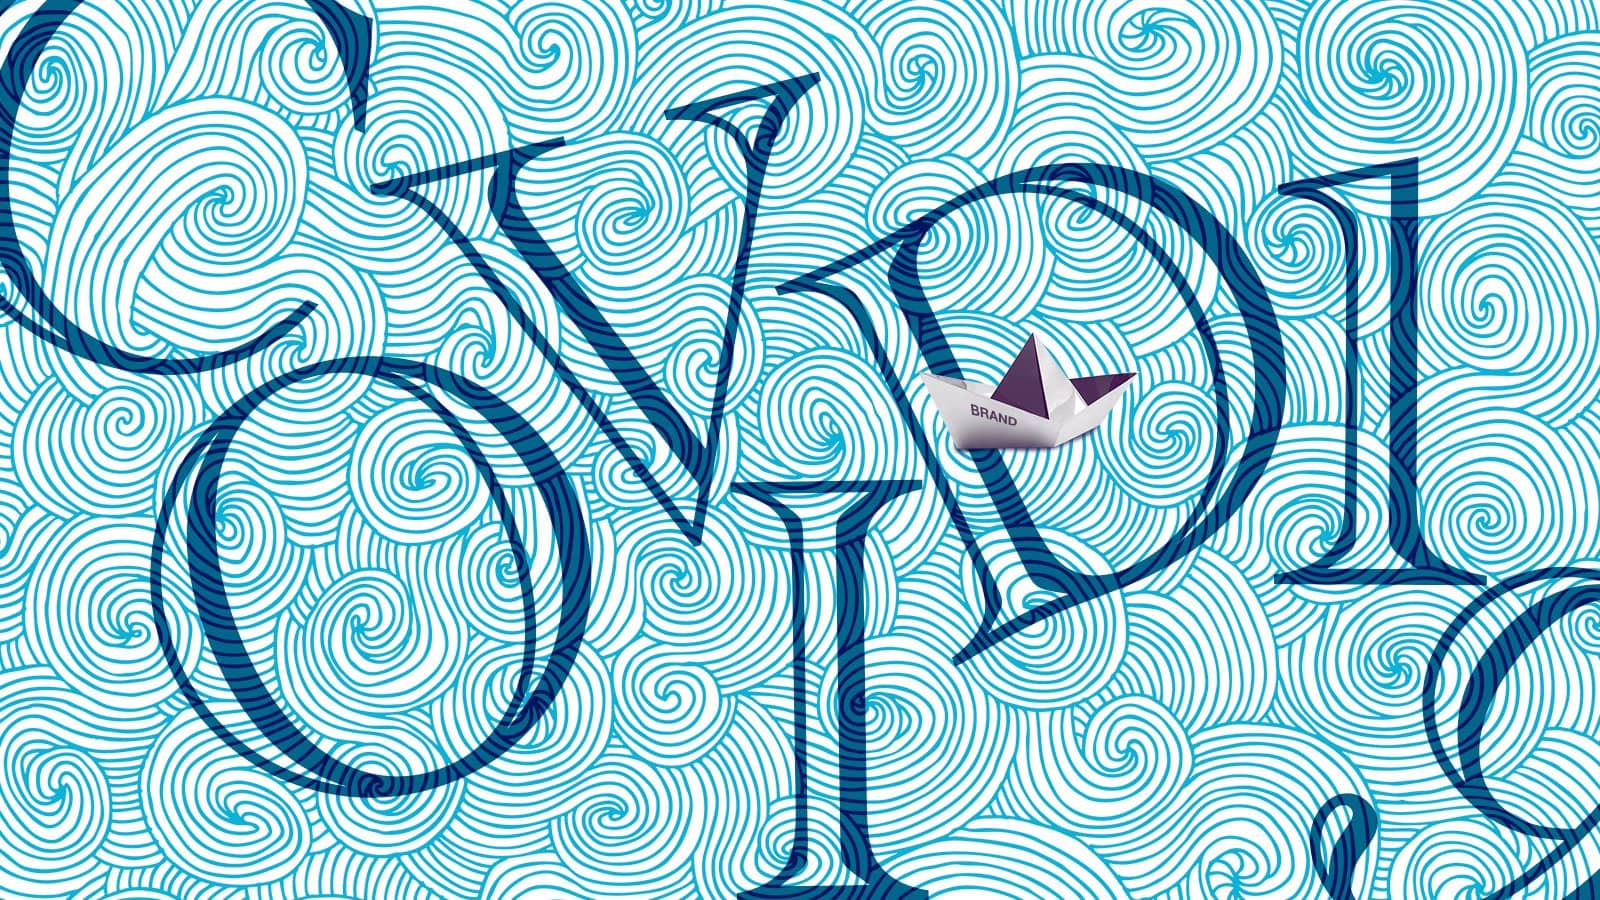 Illustration of small paper boat over the ocean with the words COVID-19